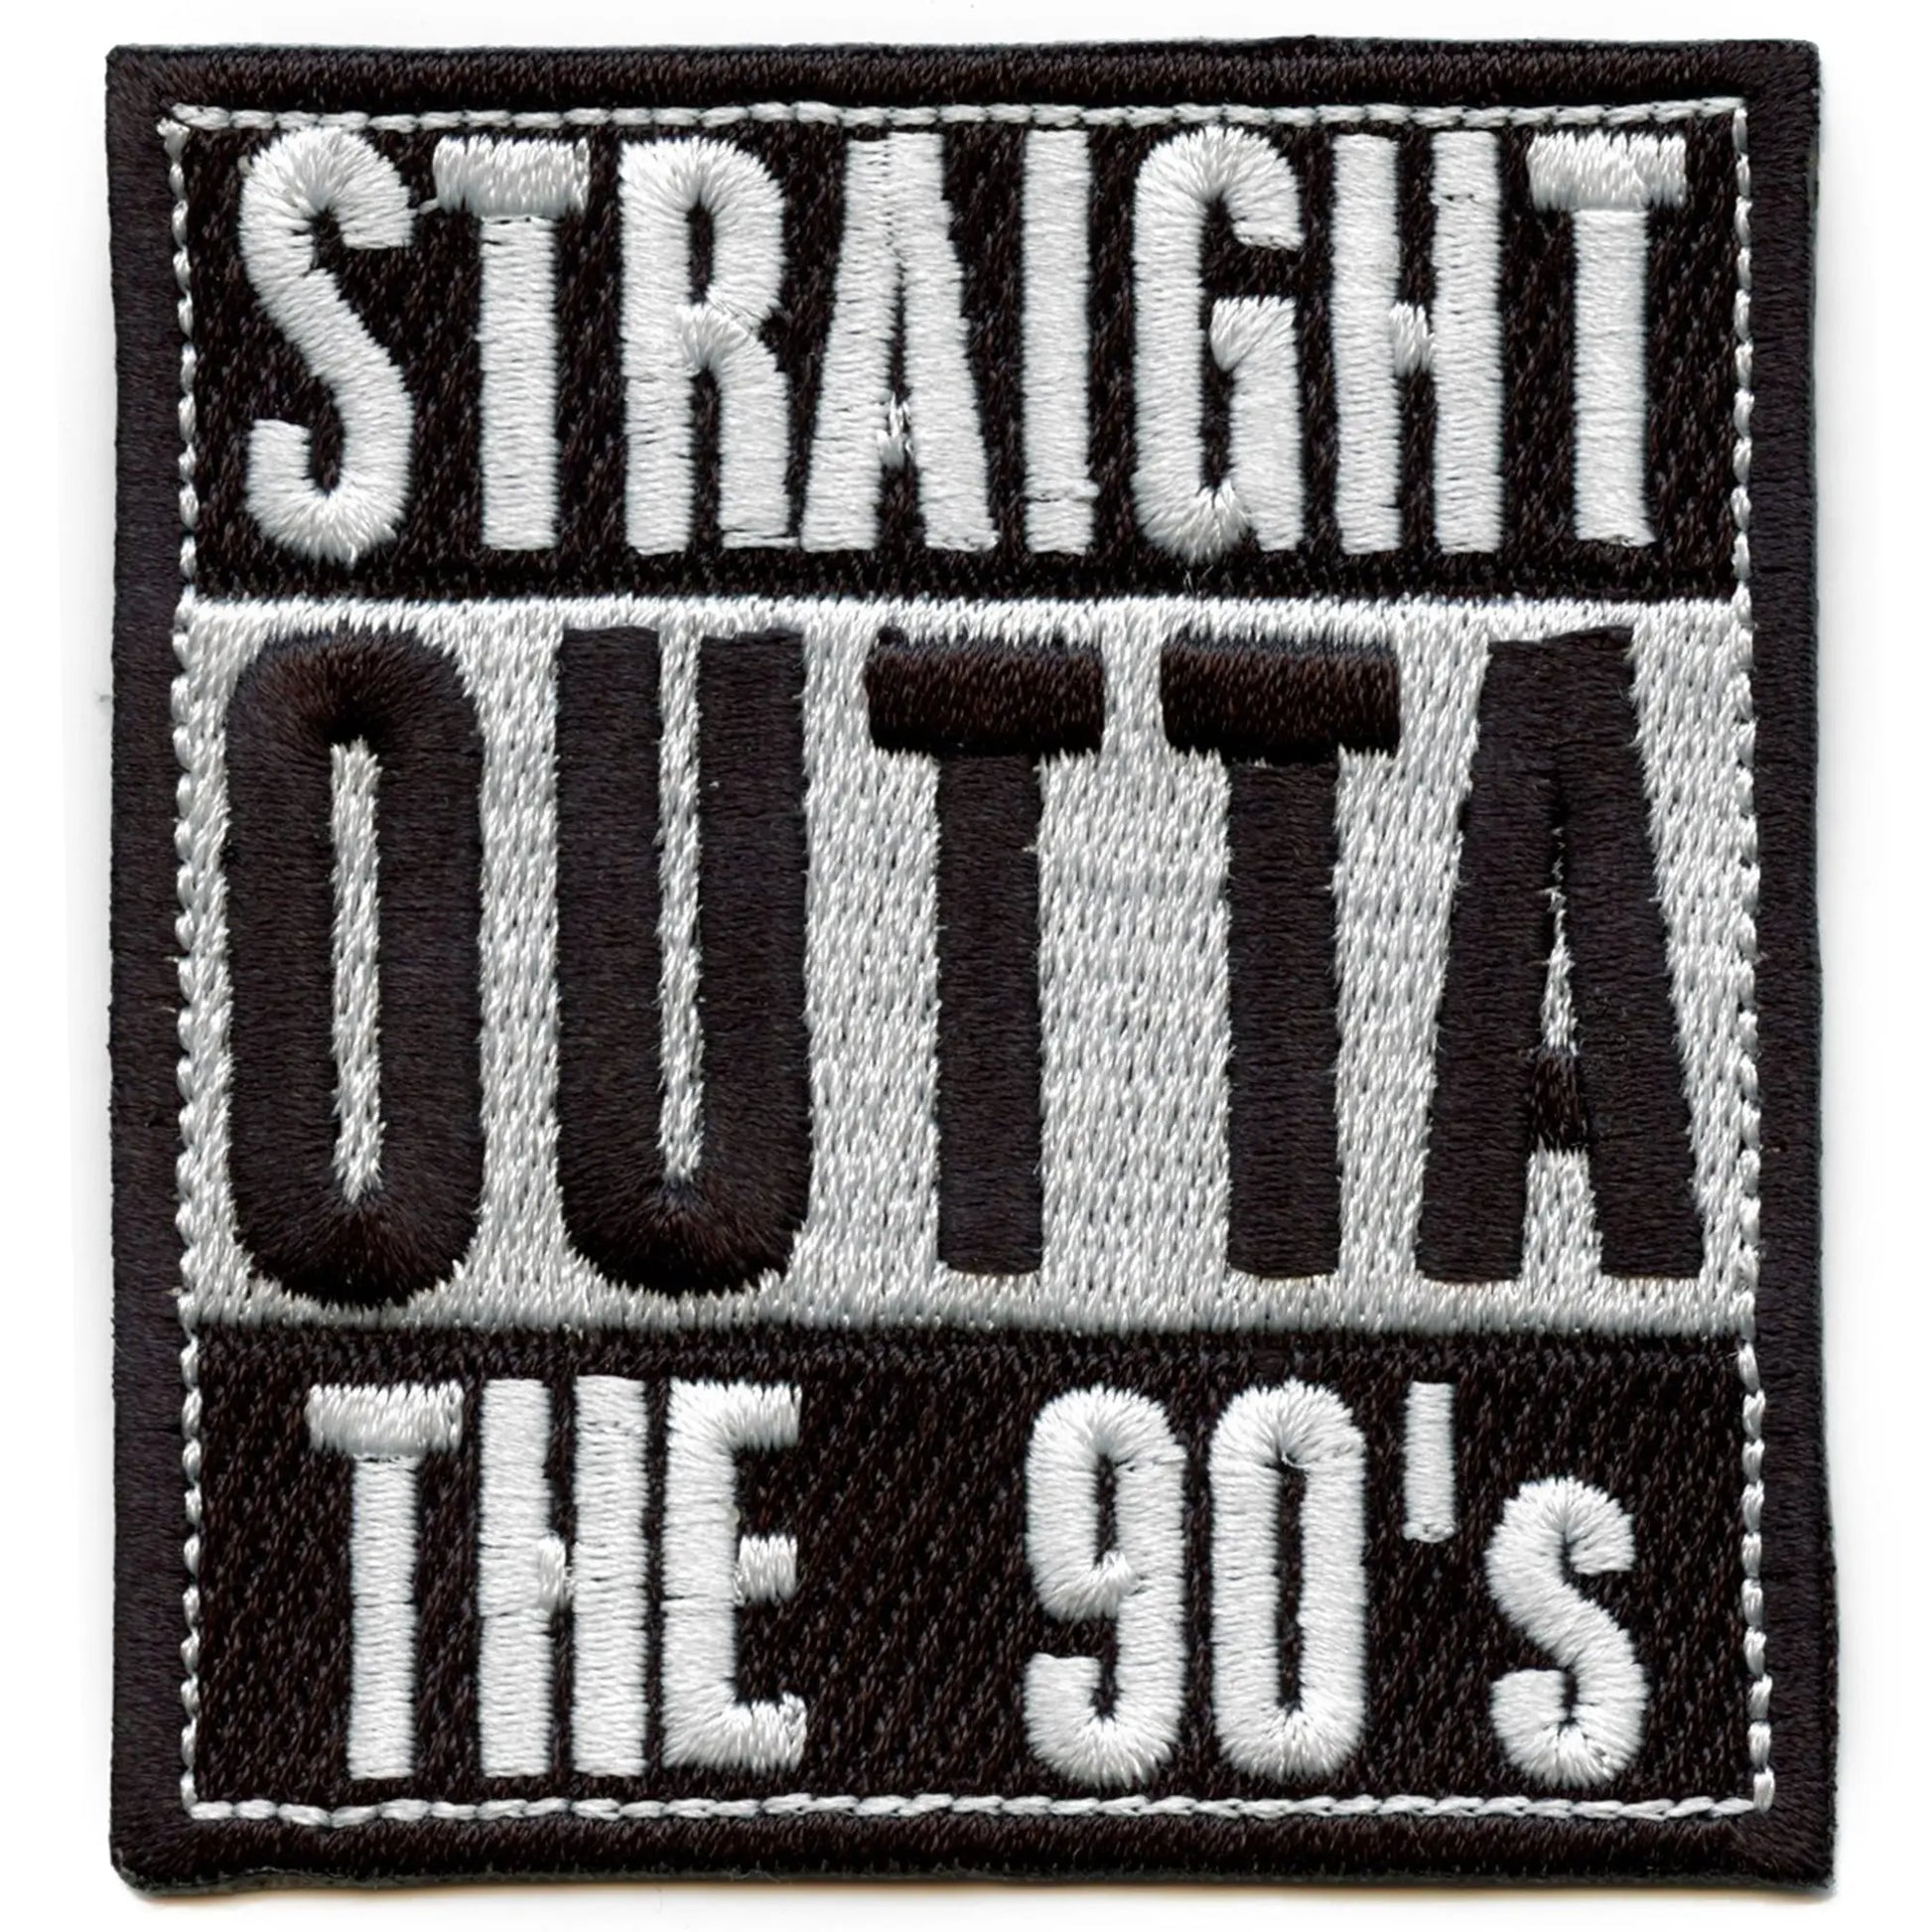 Straight Outta The 90s Embroidered Iron On Patch 